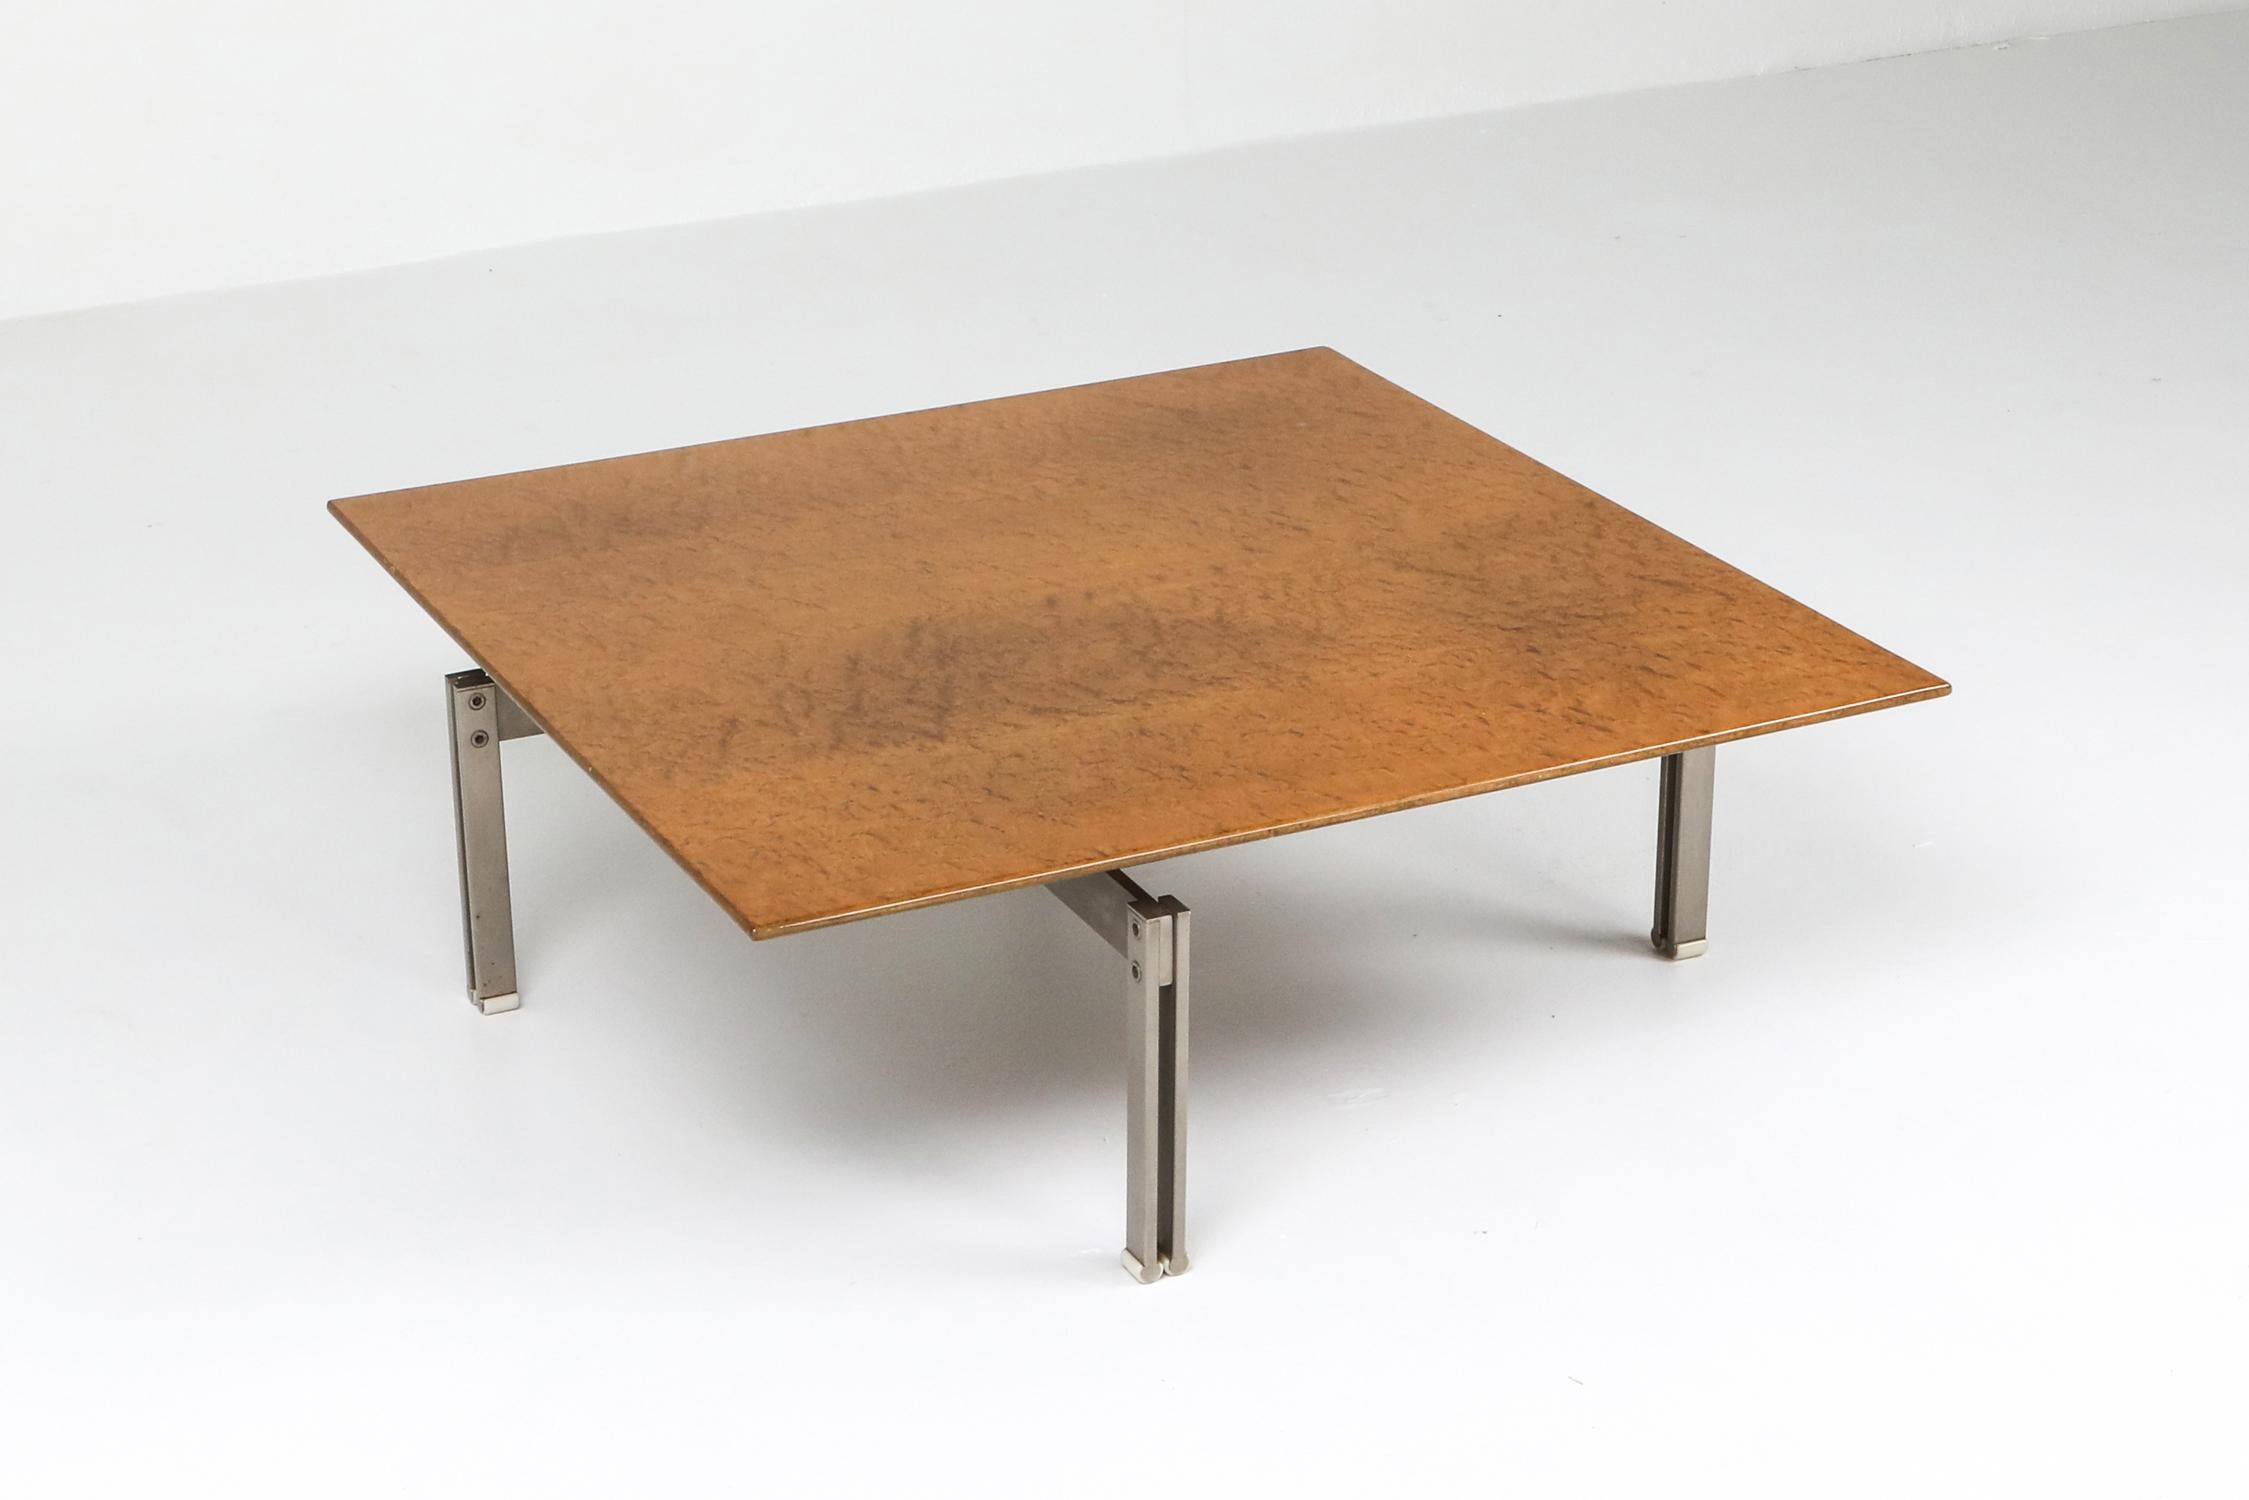 Mid-Century Modern square coffee table in the style of Milo Baughman. Made out of burl wood with a steel base. Made in the United States, circa 1970s.